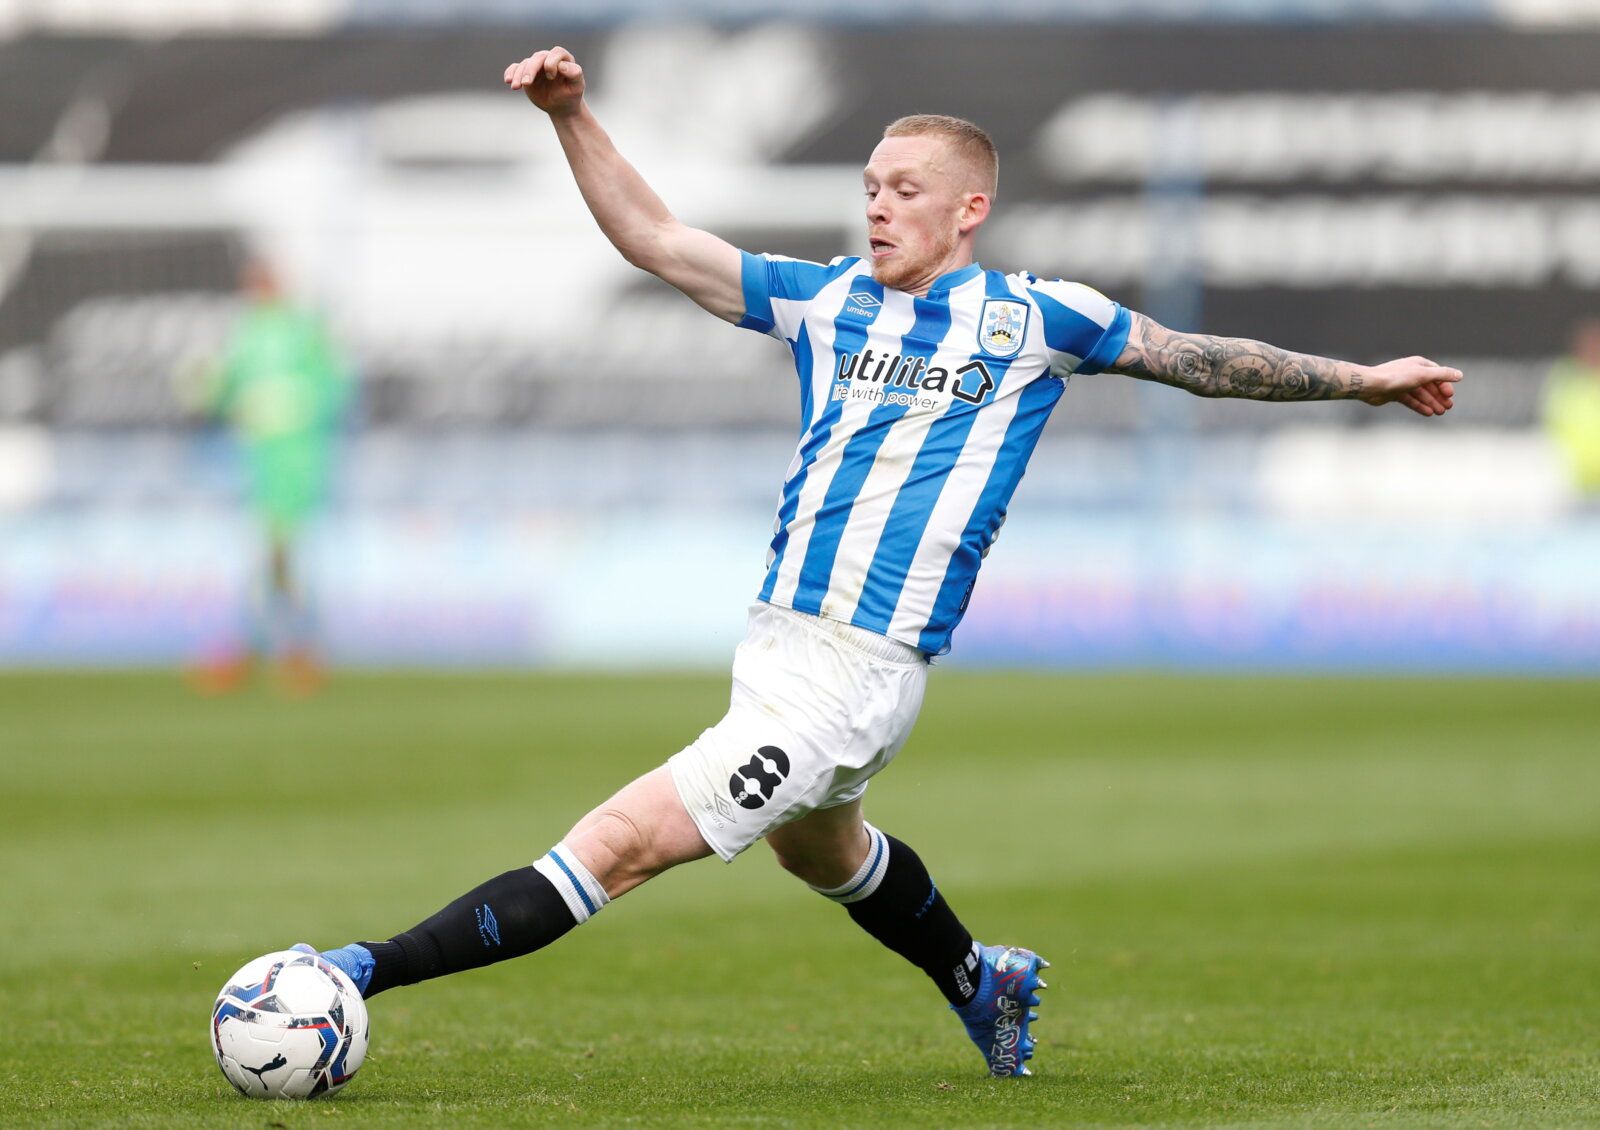 Soccer Football - Championship - Huddersfield Town v Hull City - John Smith's Stadium, Huddersfield, Britain - October 16, 2021 Huddersfield Town's Lewis O'Brien in action  Action Images/Ed Sykes  EDITORIAL USE ONLY. No use with unauthorized audio, video, data, fixture lists, club/league logos or 